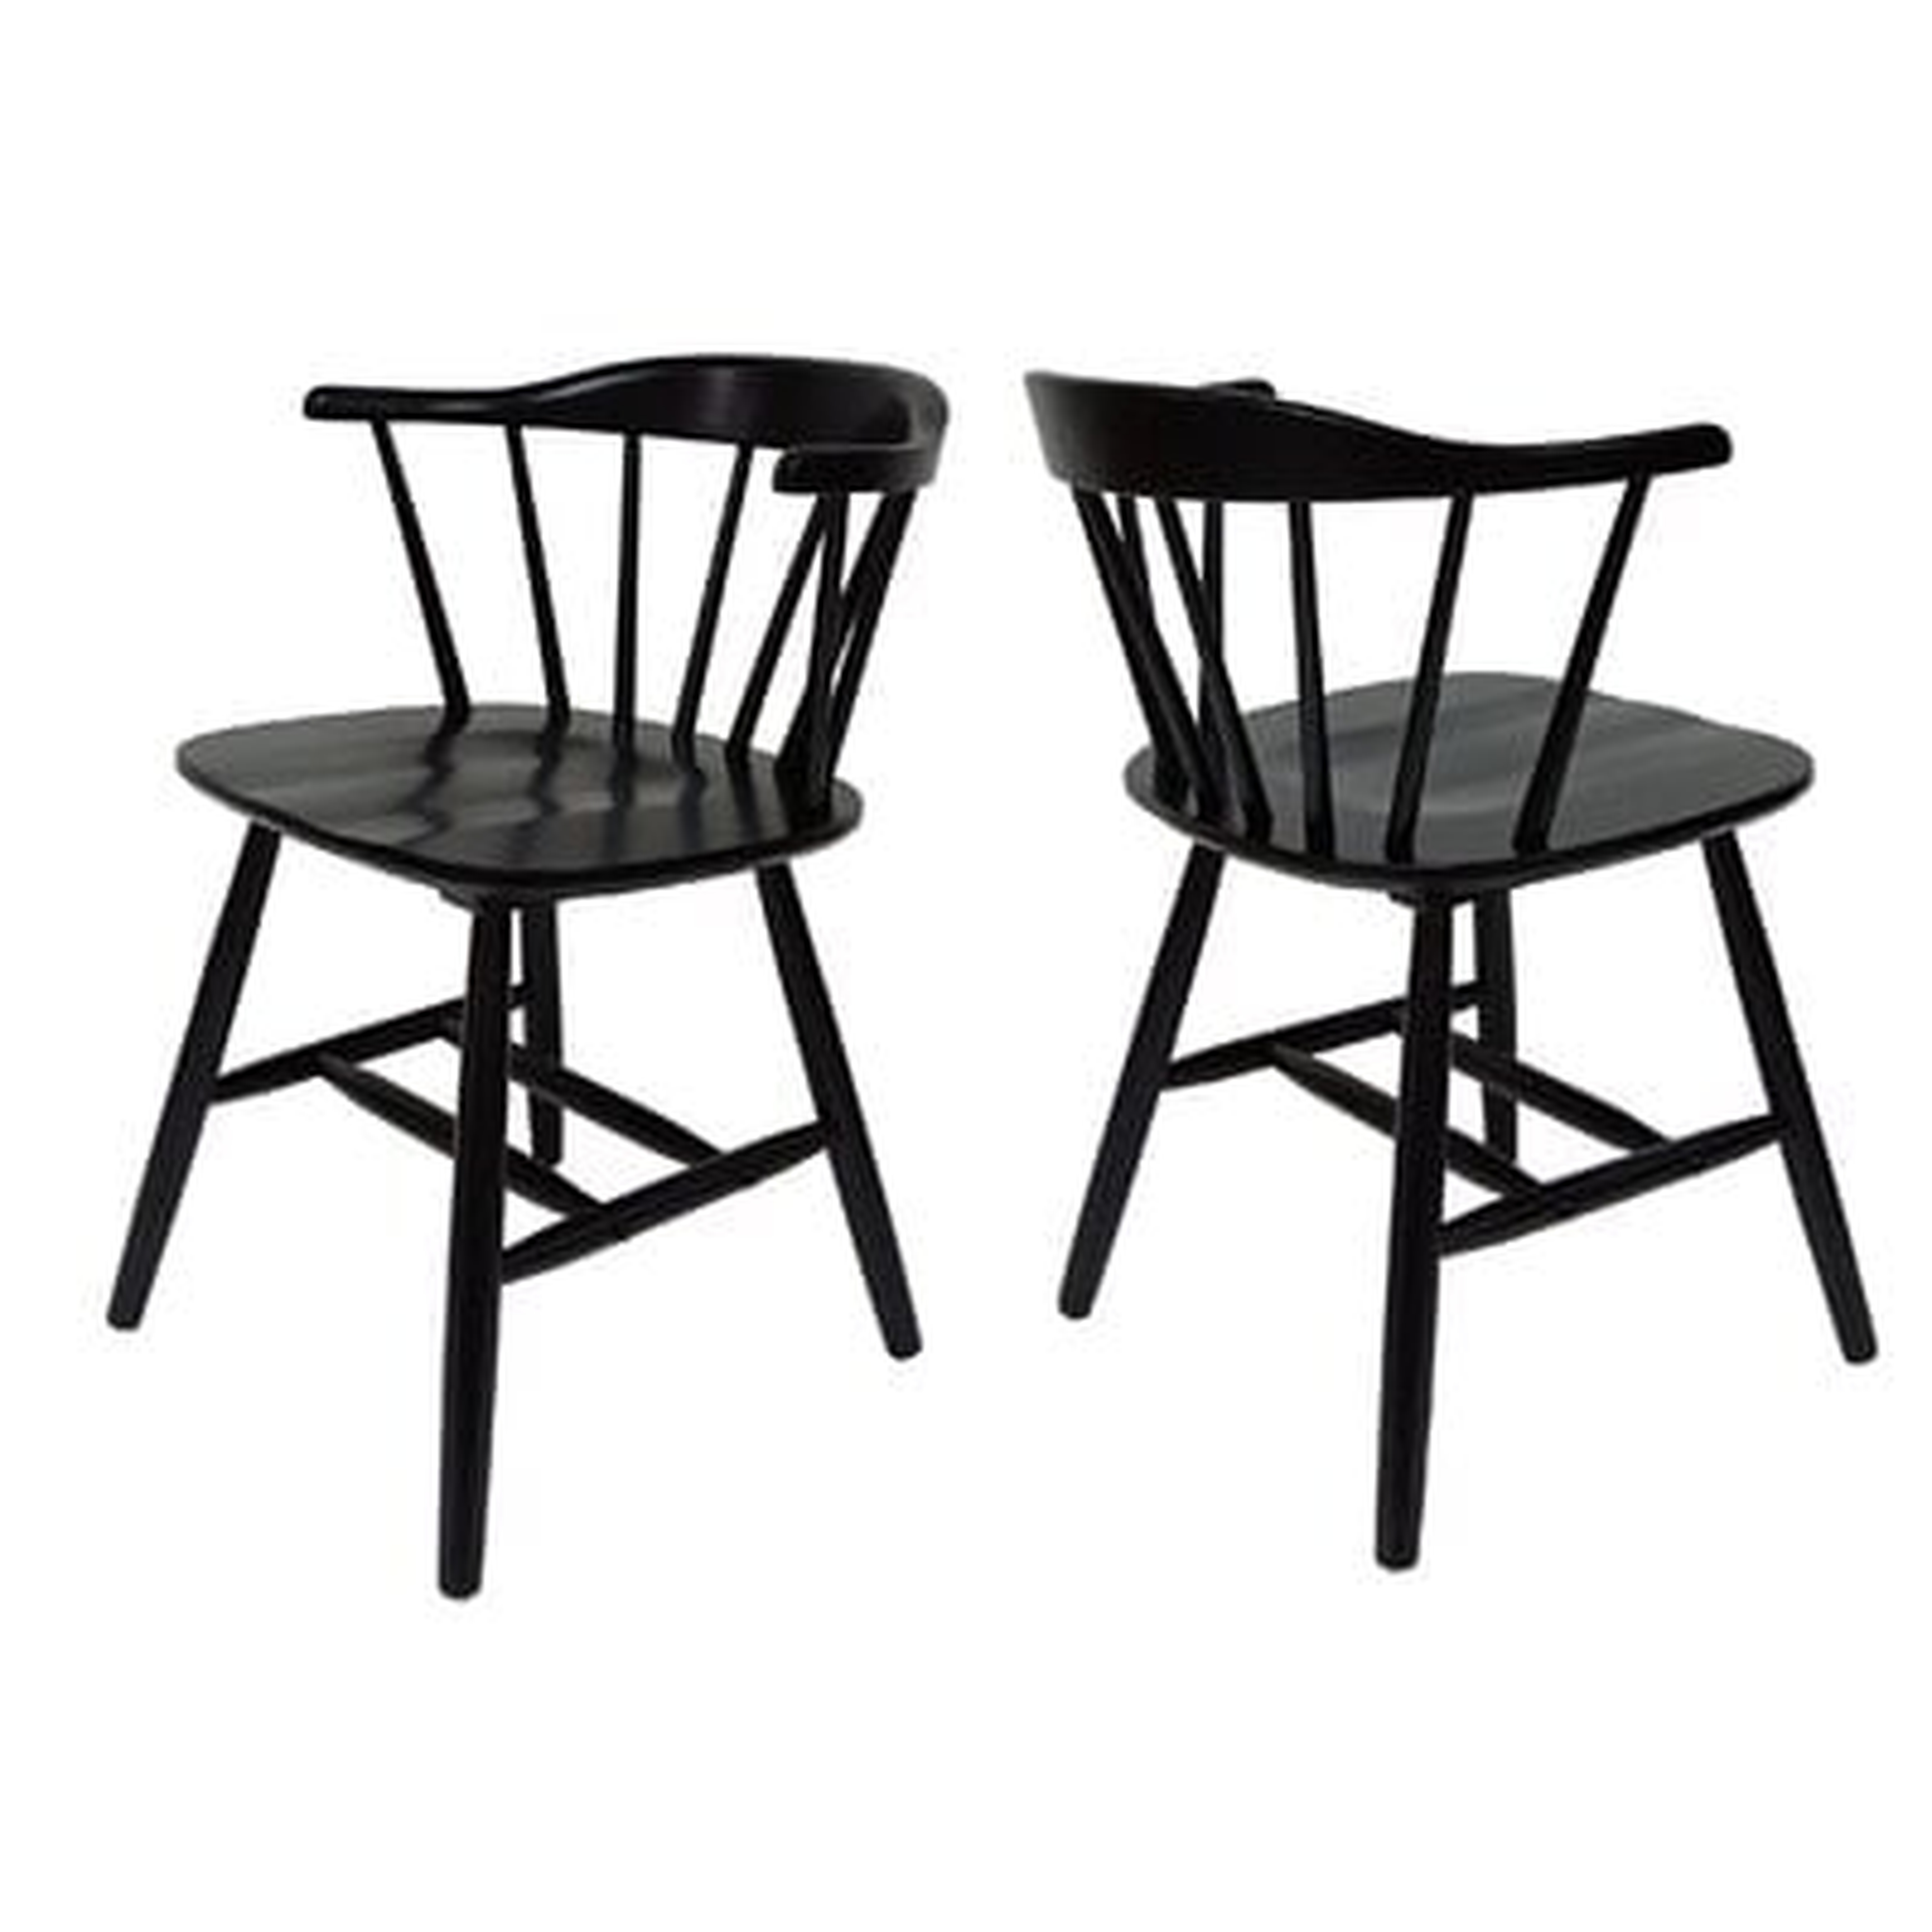 Doiron Farmhouse Spindle Back Rubberwood Dining Chairs (Set of 2) - Wayfair